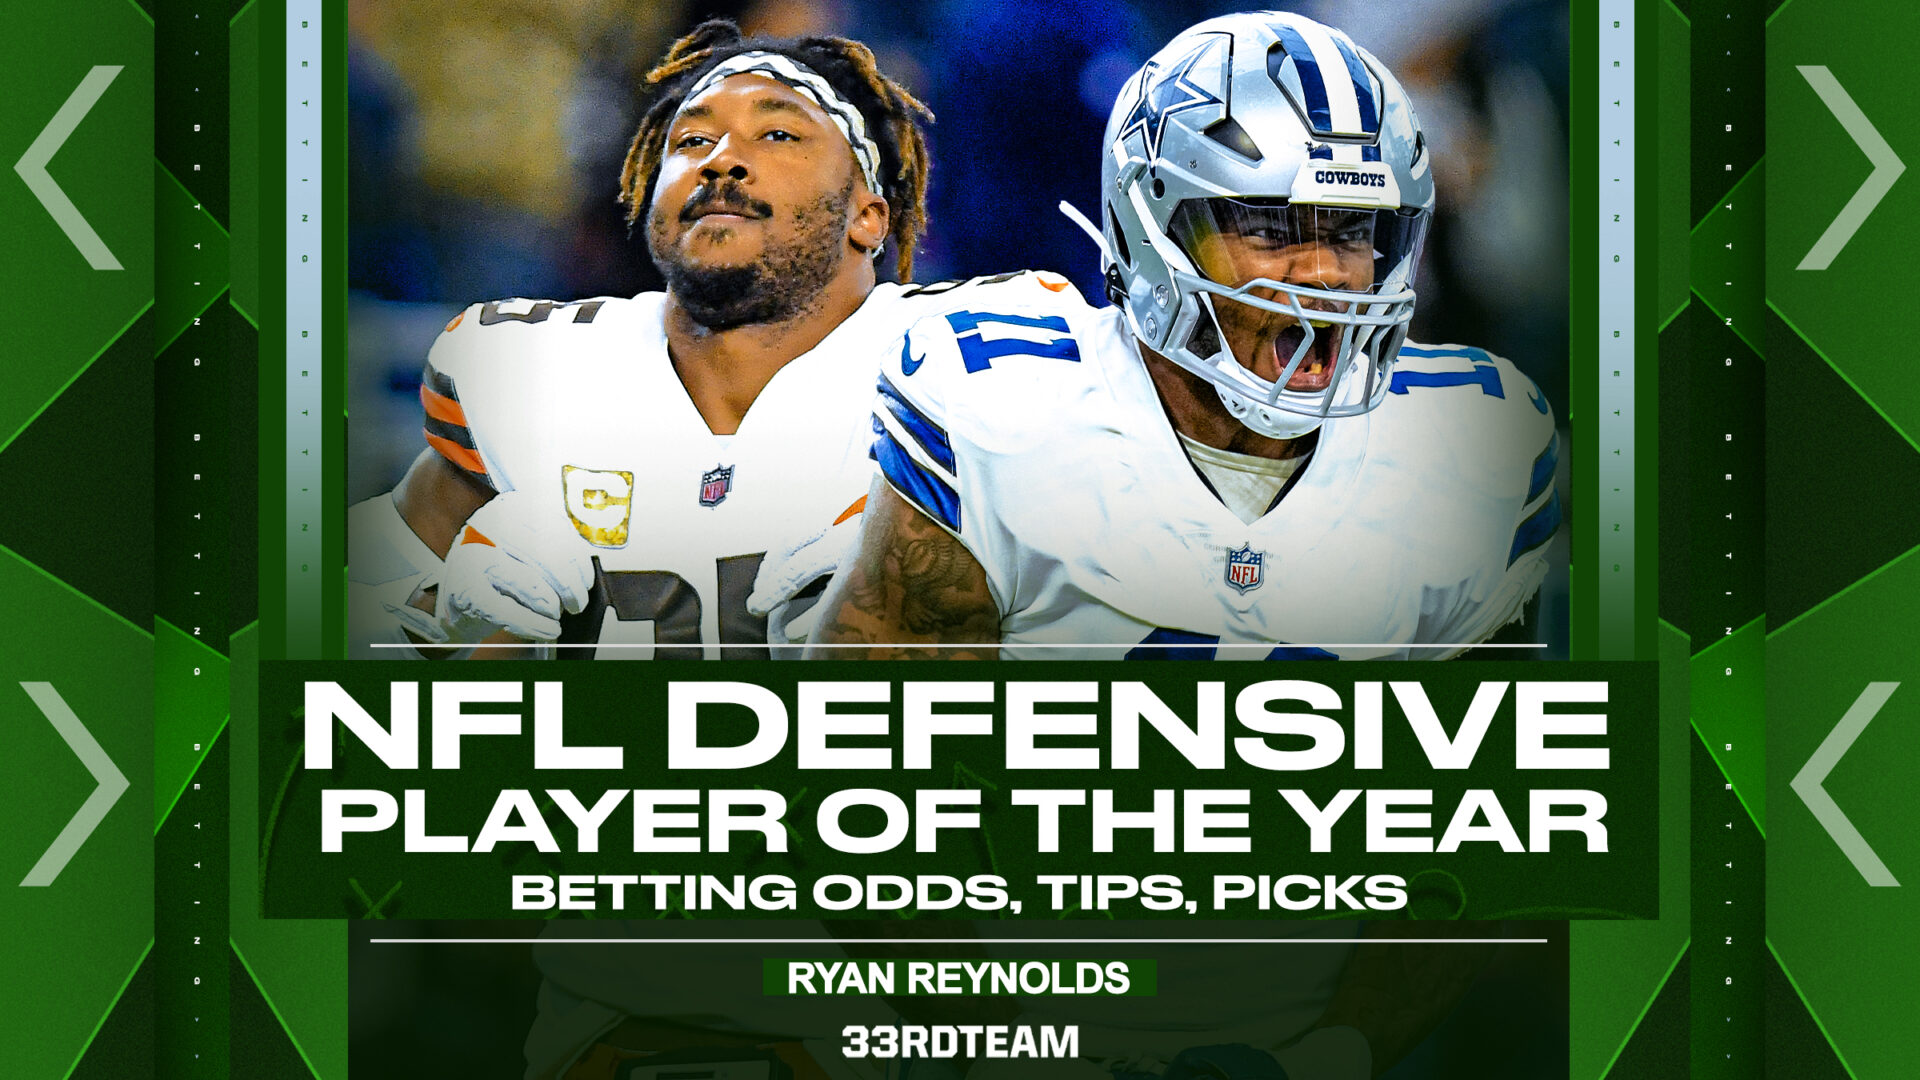 Graphic featuring cut-out images of Myles Garrett (L) and Micah Parsons (R) with green arrows on the side. The text reads "NFL Defensive Player of the Year Betting Odds"